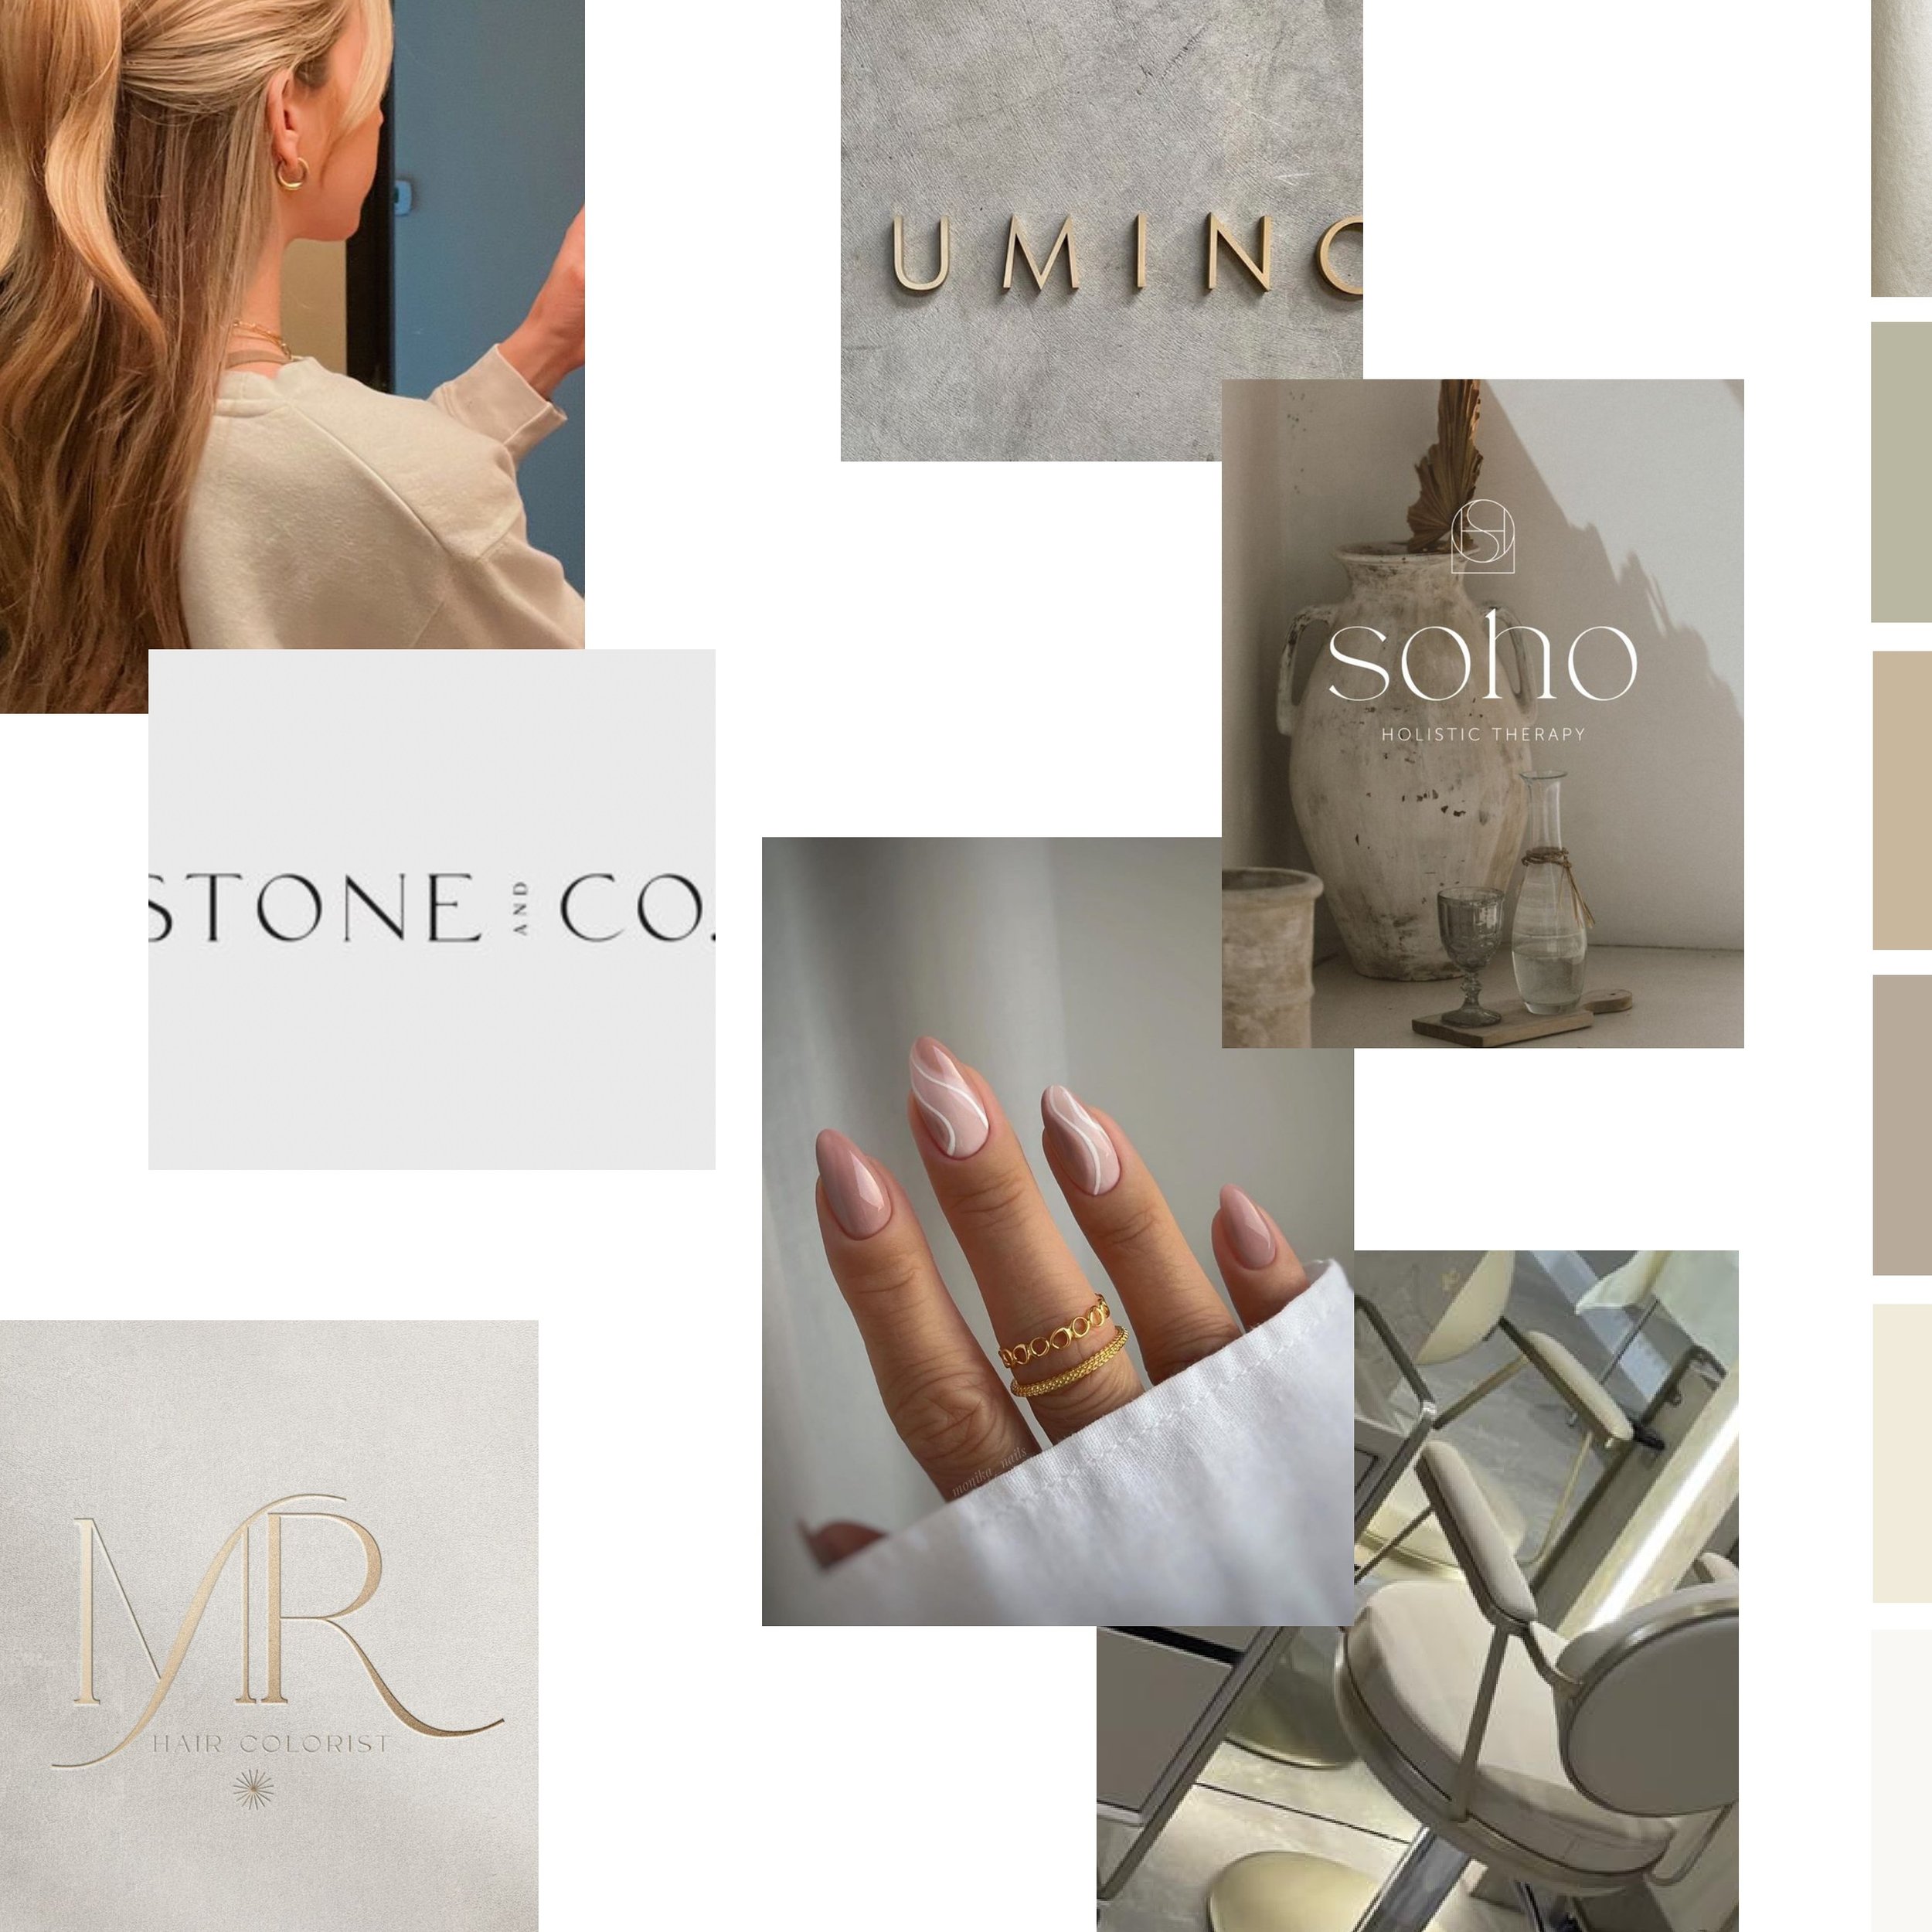 Happy Moodboard Monday! Kicking off the week with a sneak peek into our latest project: the Moodboard for a sleek beauty salon rebrand. Stay tuned for the unveil of this transformation 🤩

#moodboardmonday #mondaymood #moodboardaesthetic #beautyproje